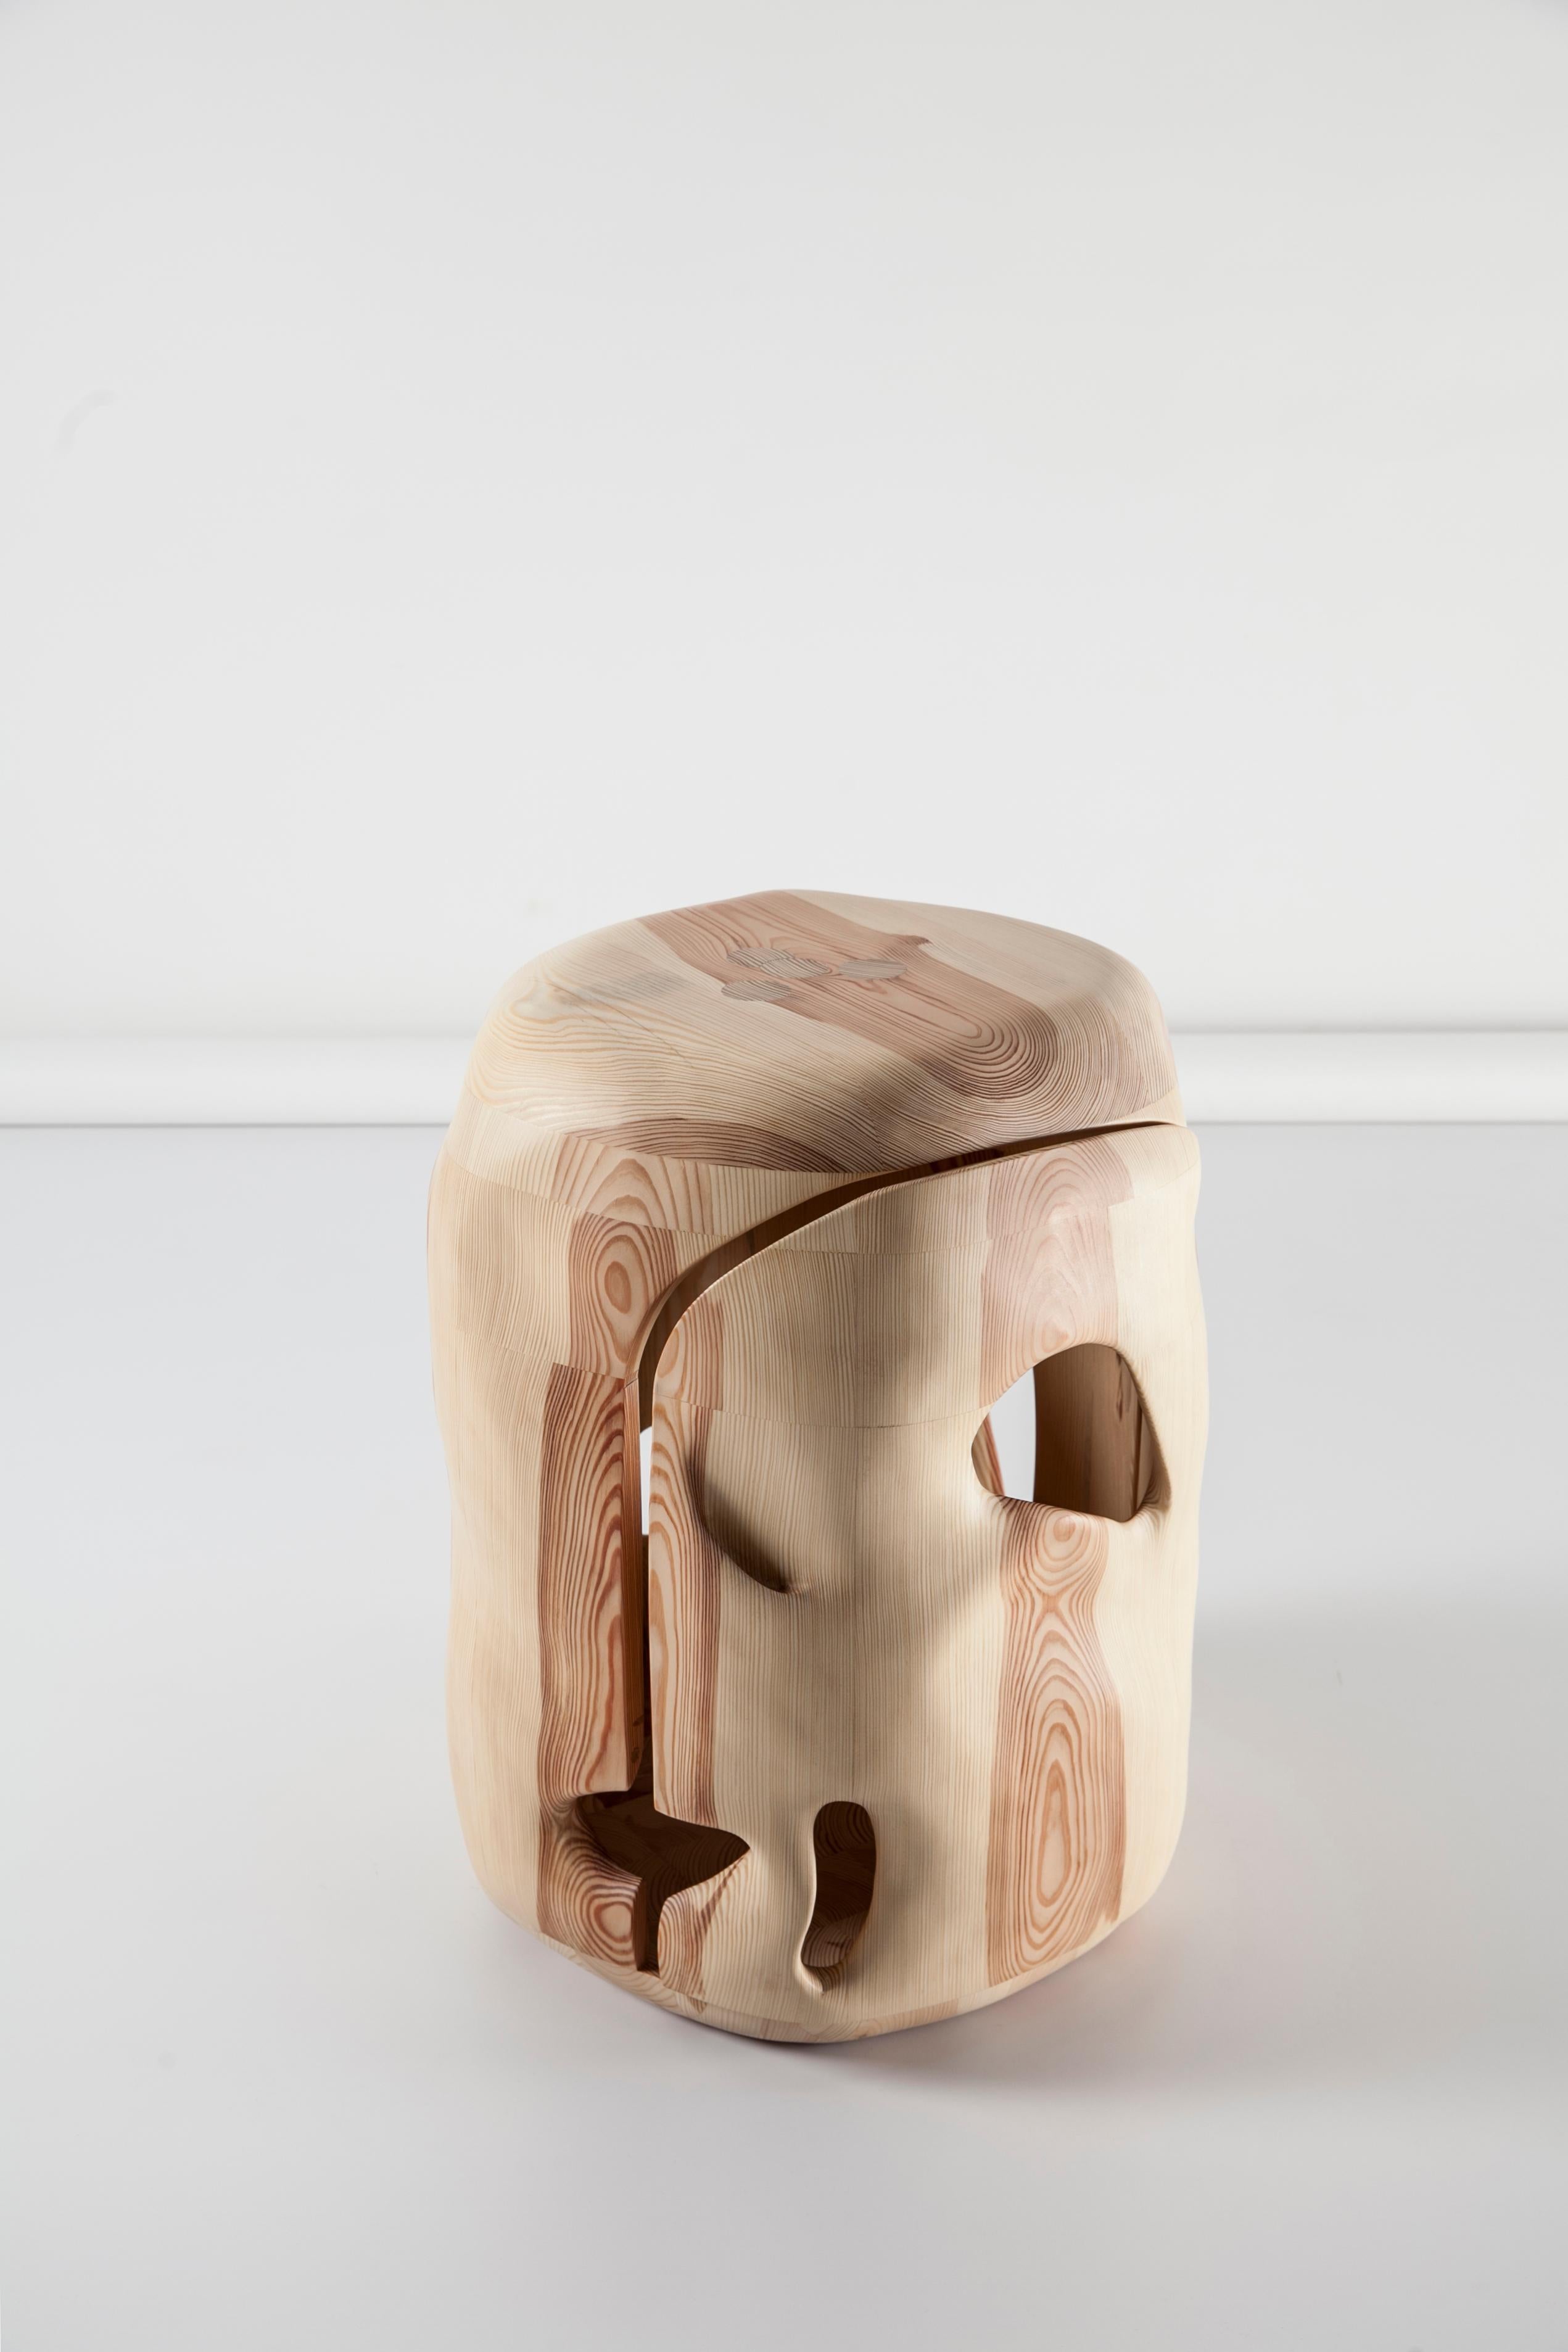 Shape N.4 by The Whole Elements
Open edition, each piece is unique 
Dimensions: H 54 x W 40 x D 40 cm
Materials: hand carved, pine wood

Launched by Anna Bera in 2014, The Whole Elements is a design studio and a wood workshop based in Warsaw.